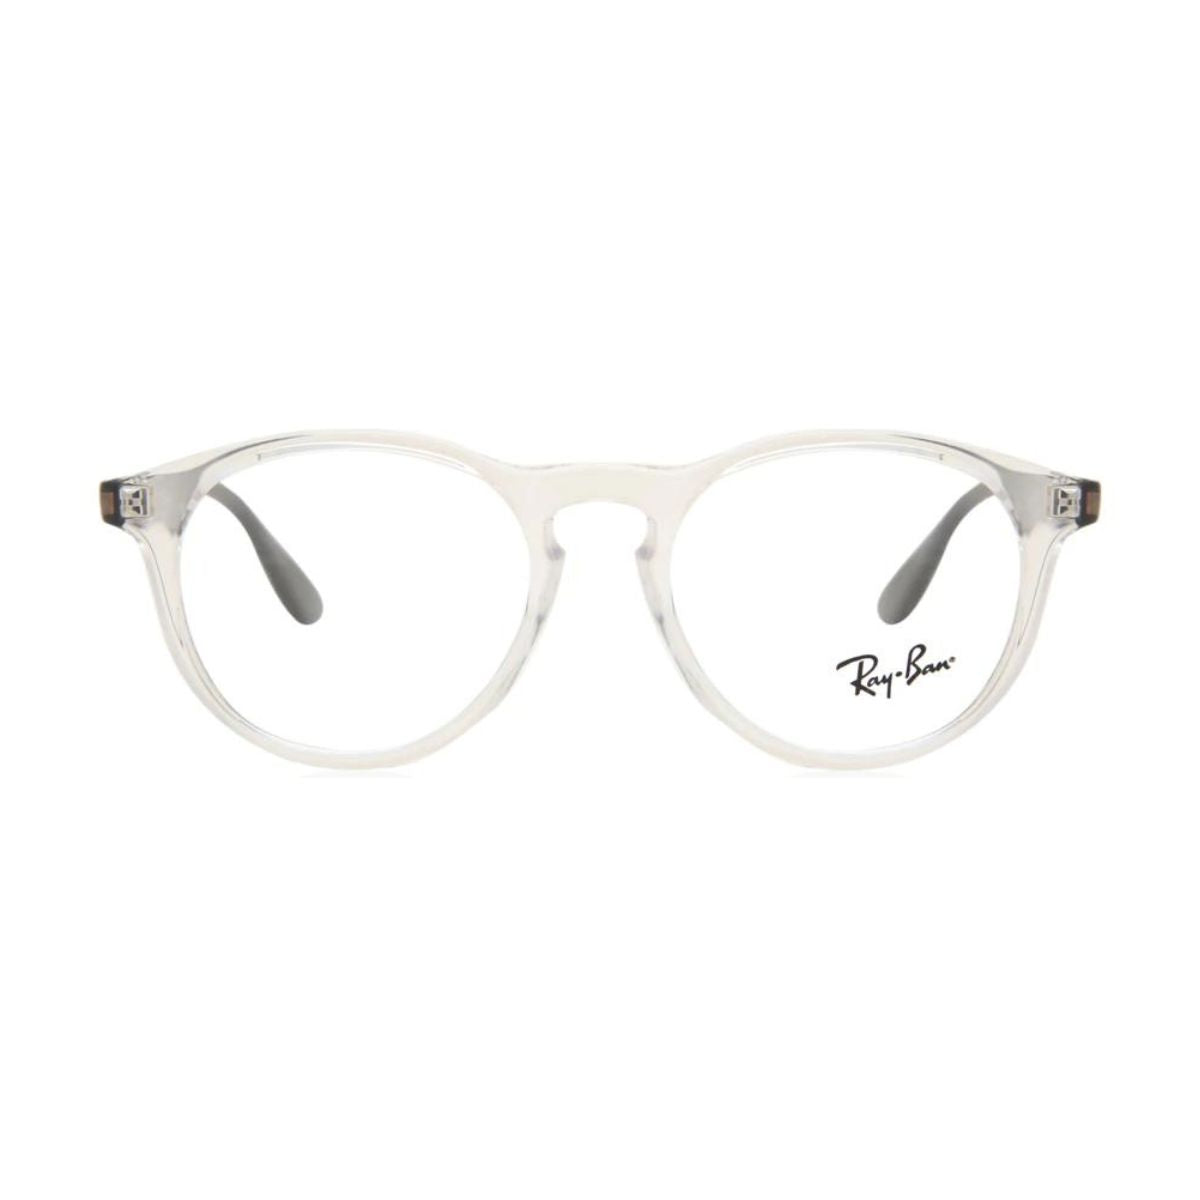 "buyRayban 1554 3541 spectacle frame for men's and women's online at optorium"